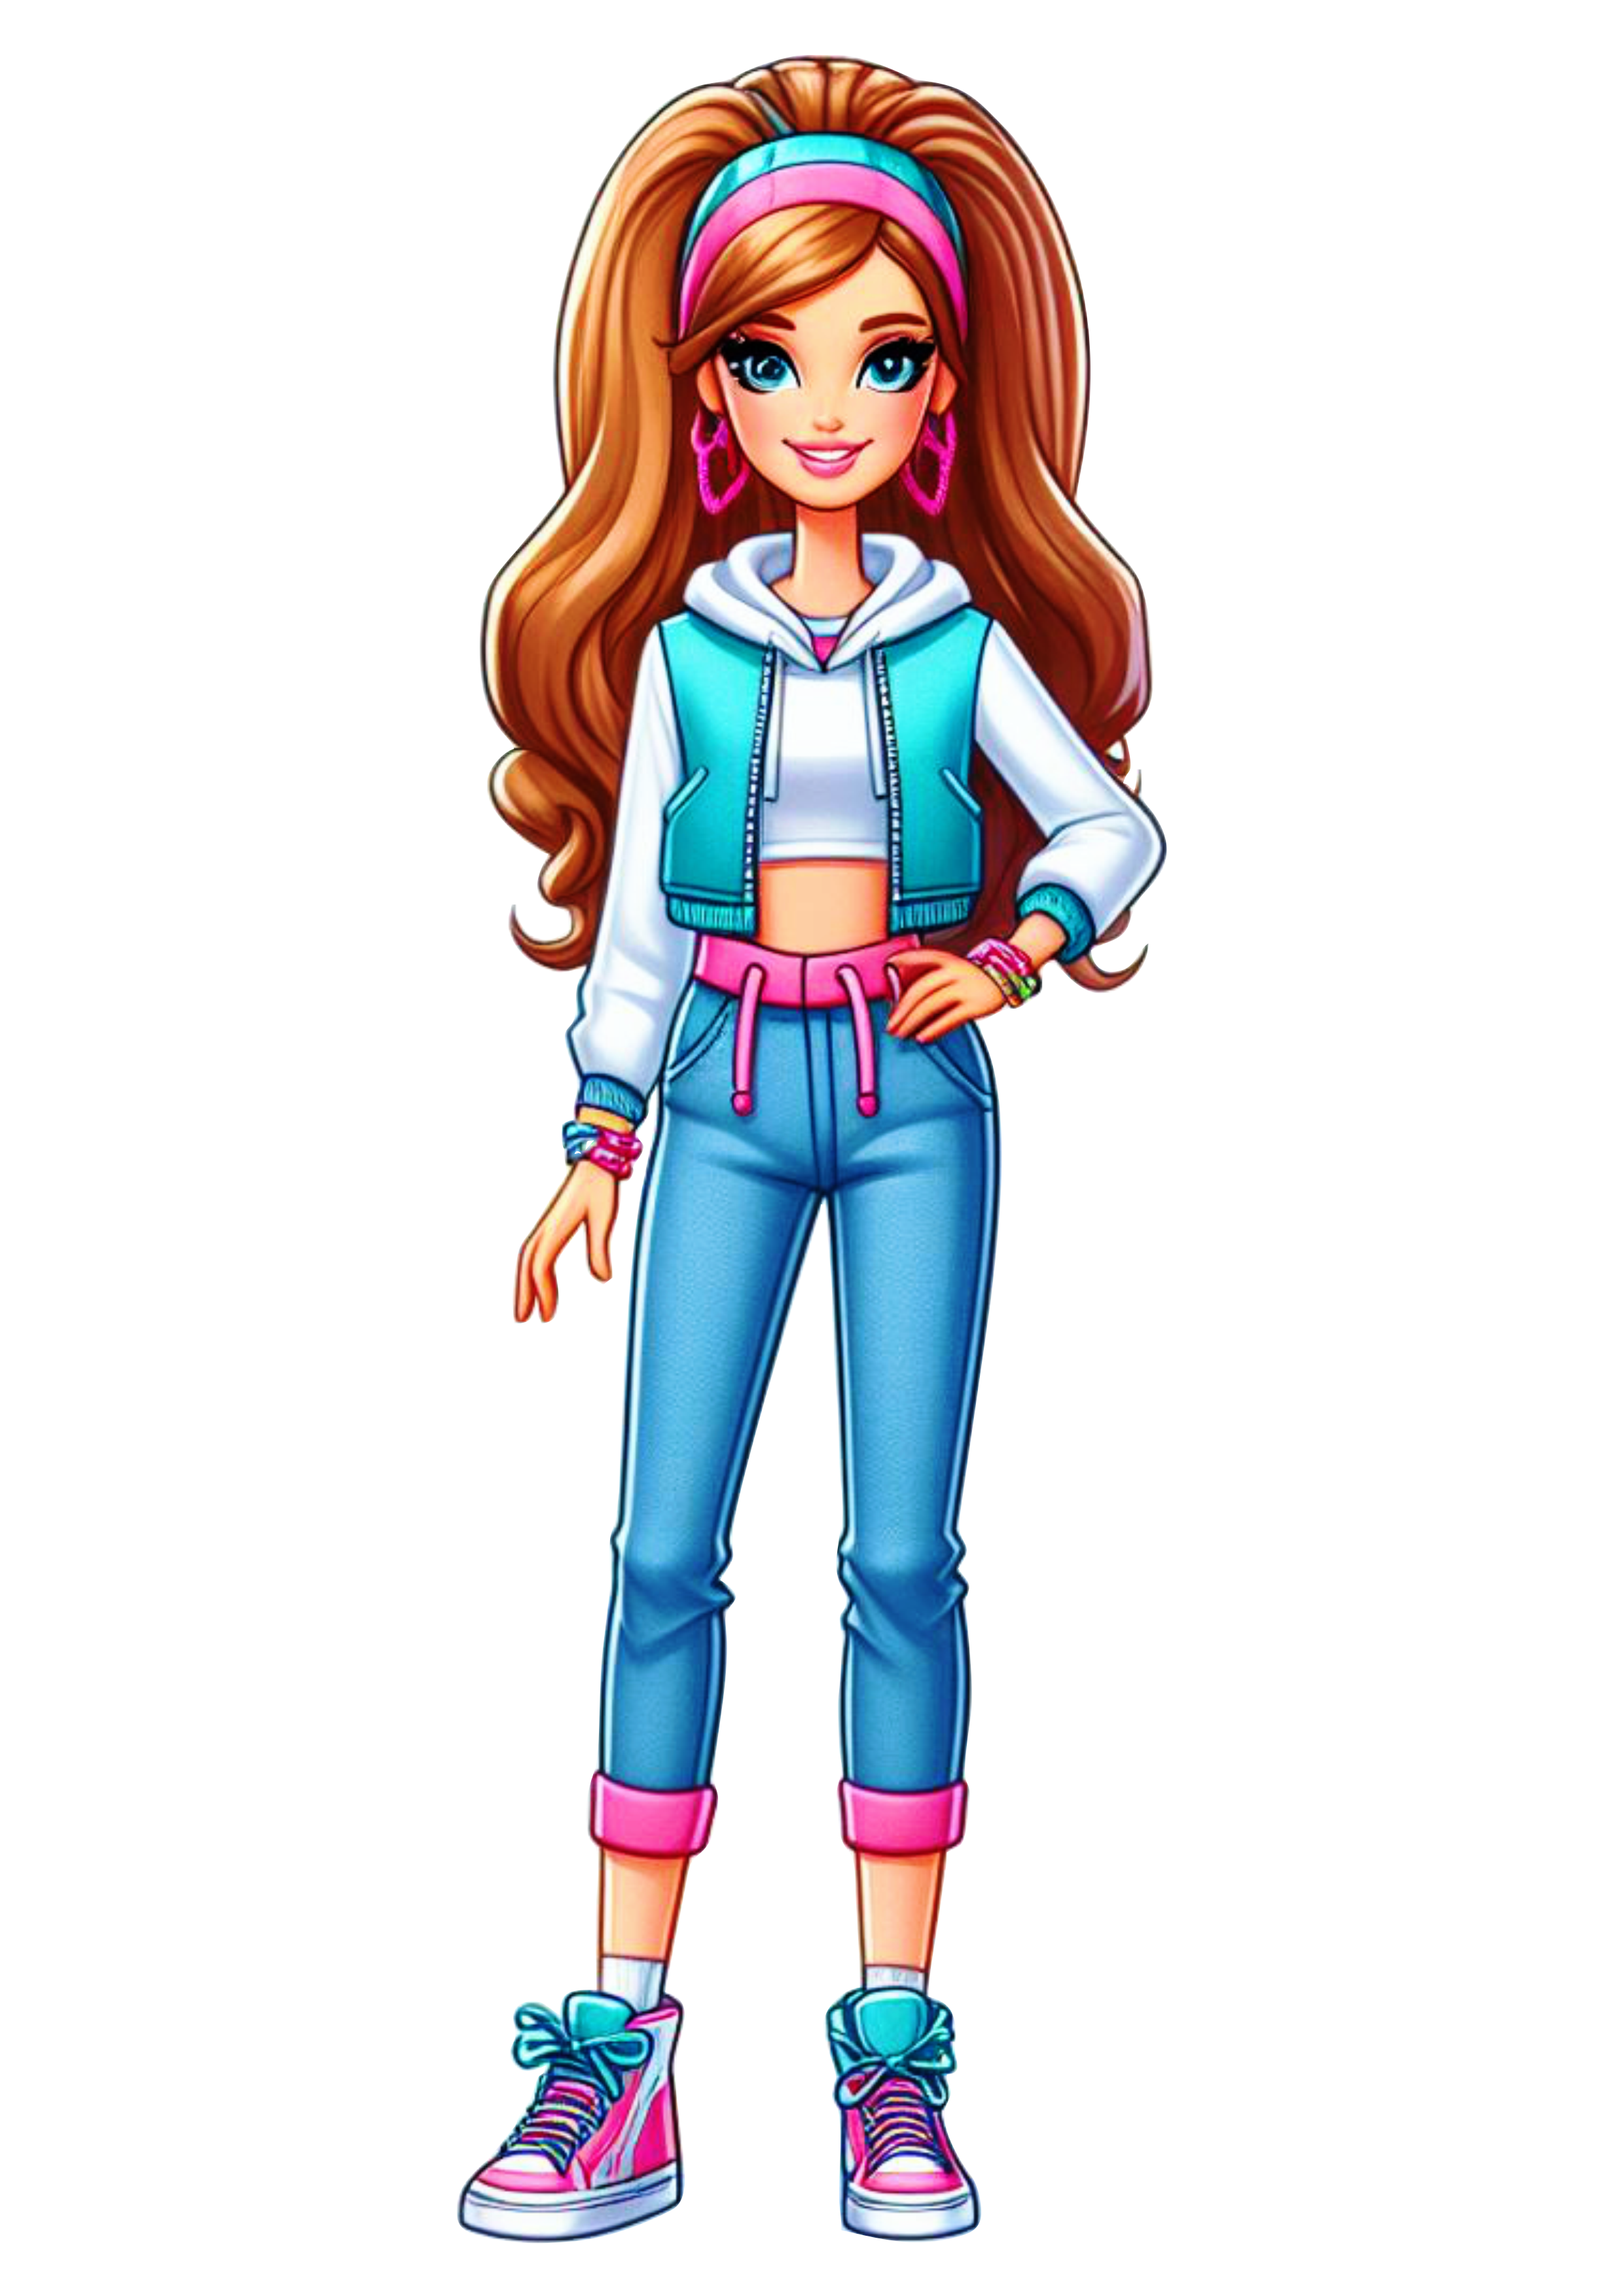 High School Barbie Doll png images